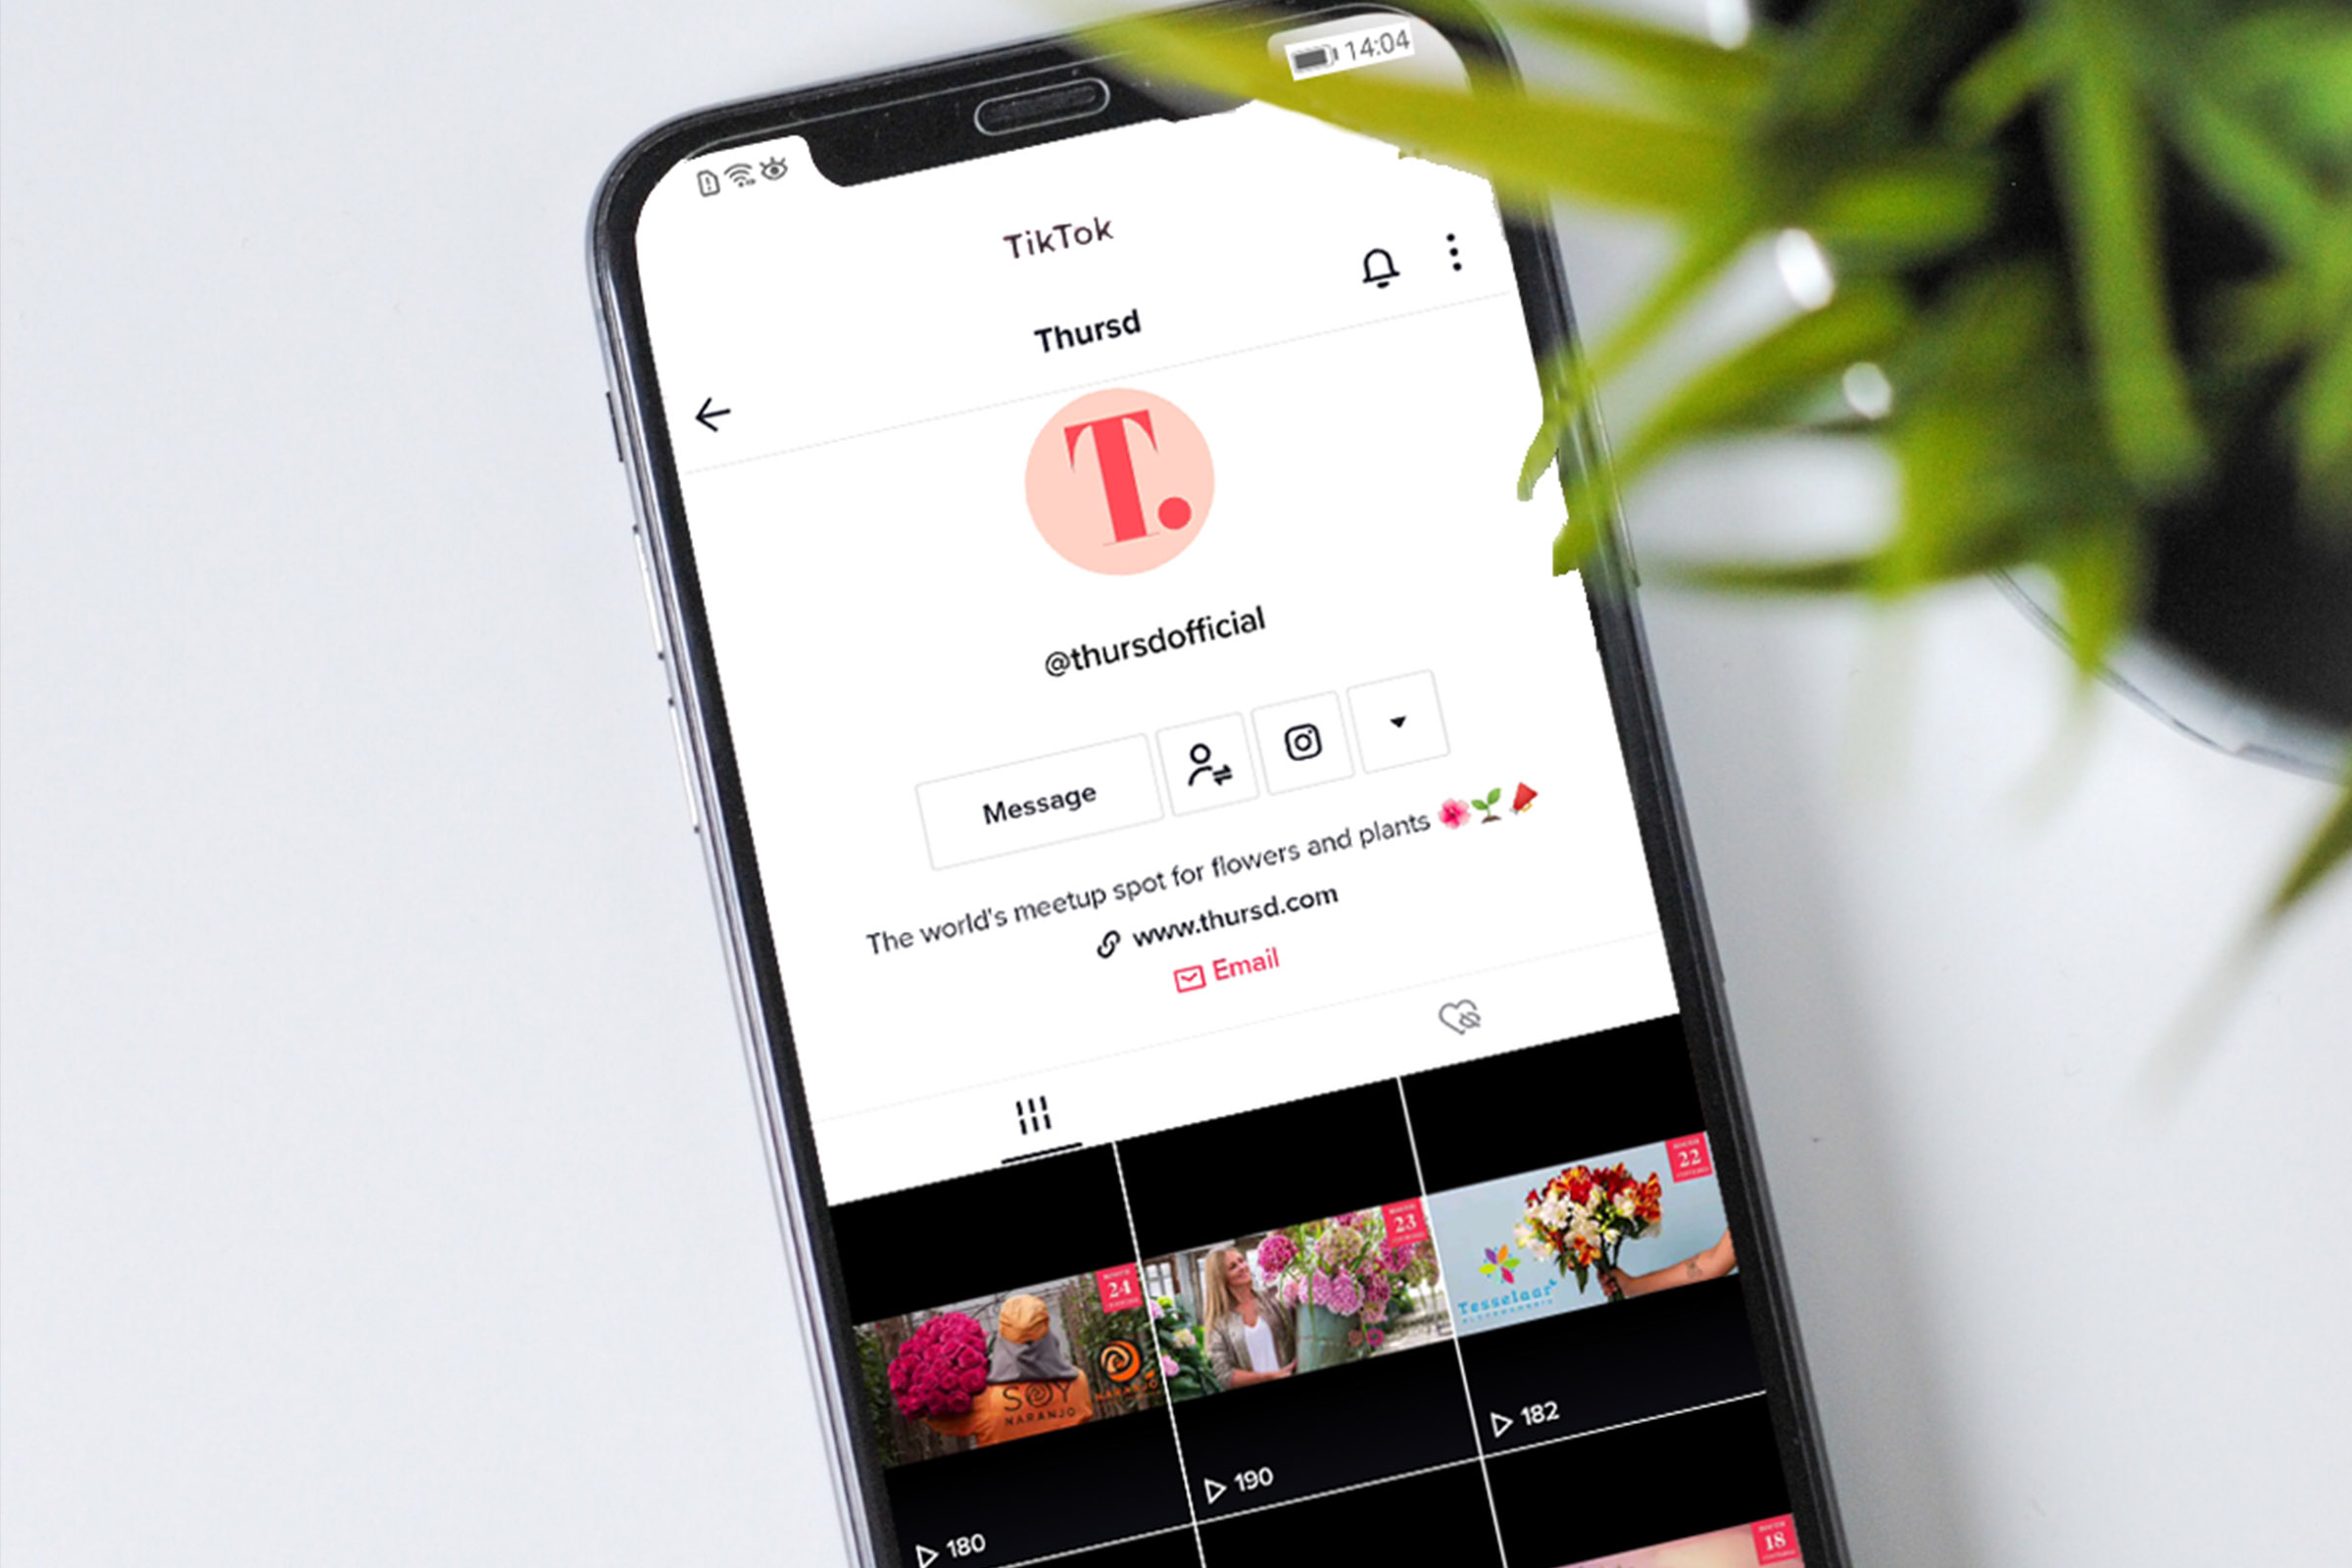 flowers-and-plants-on-tiktok-are-totally-a-thing-featured